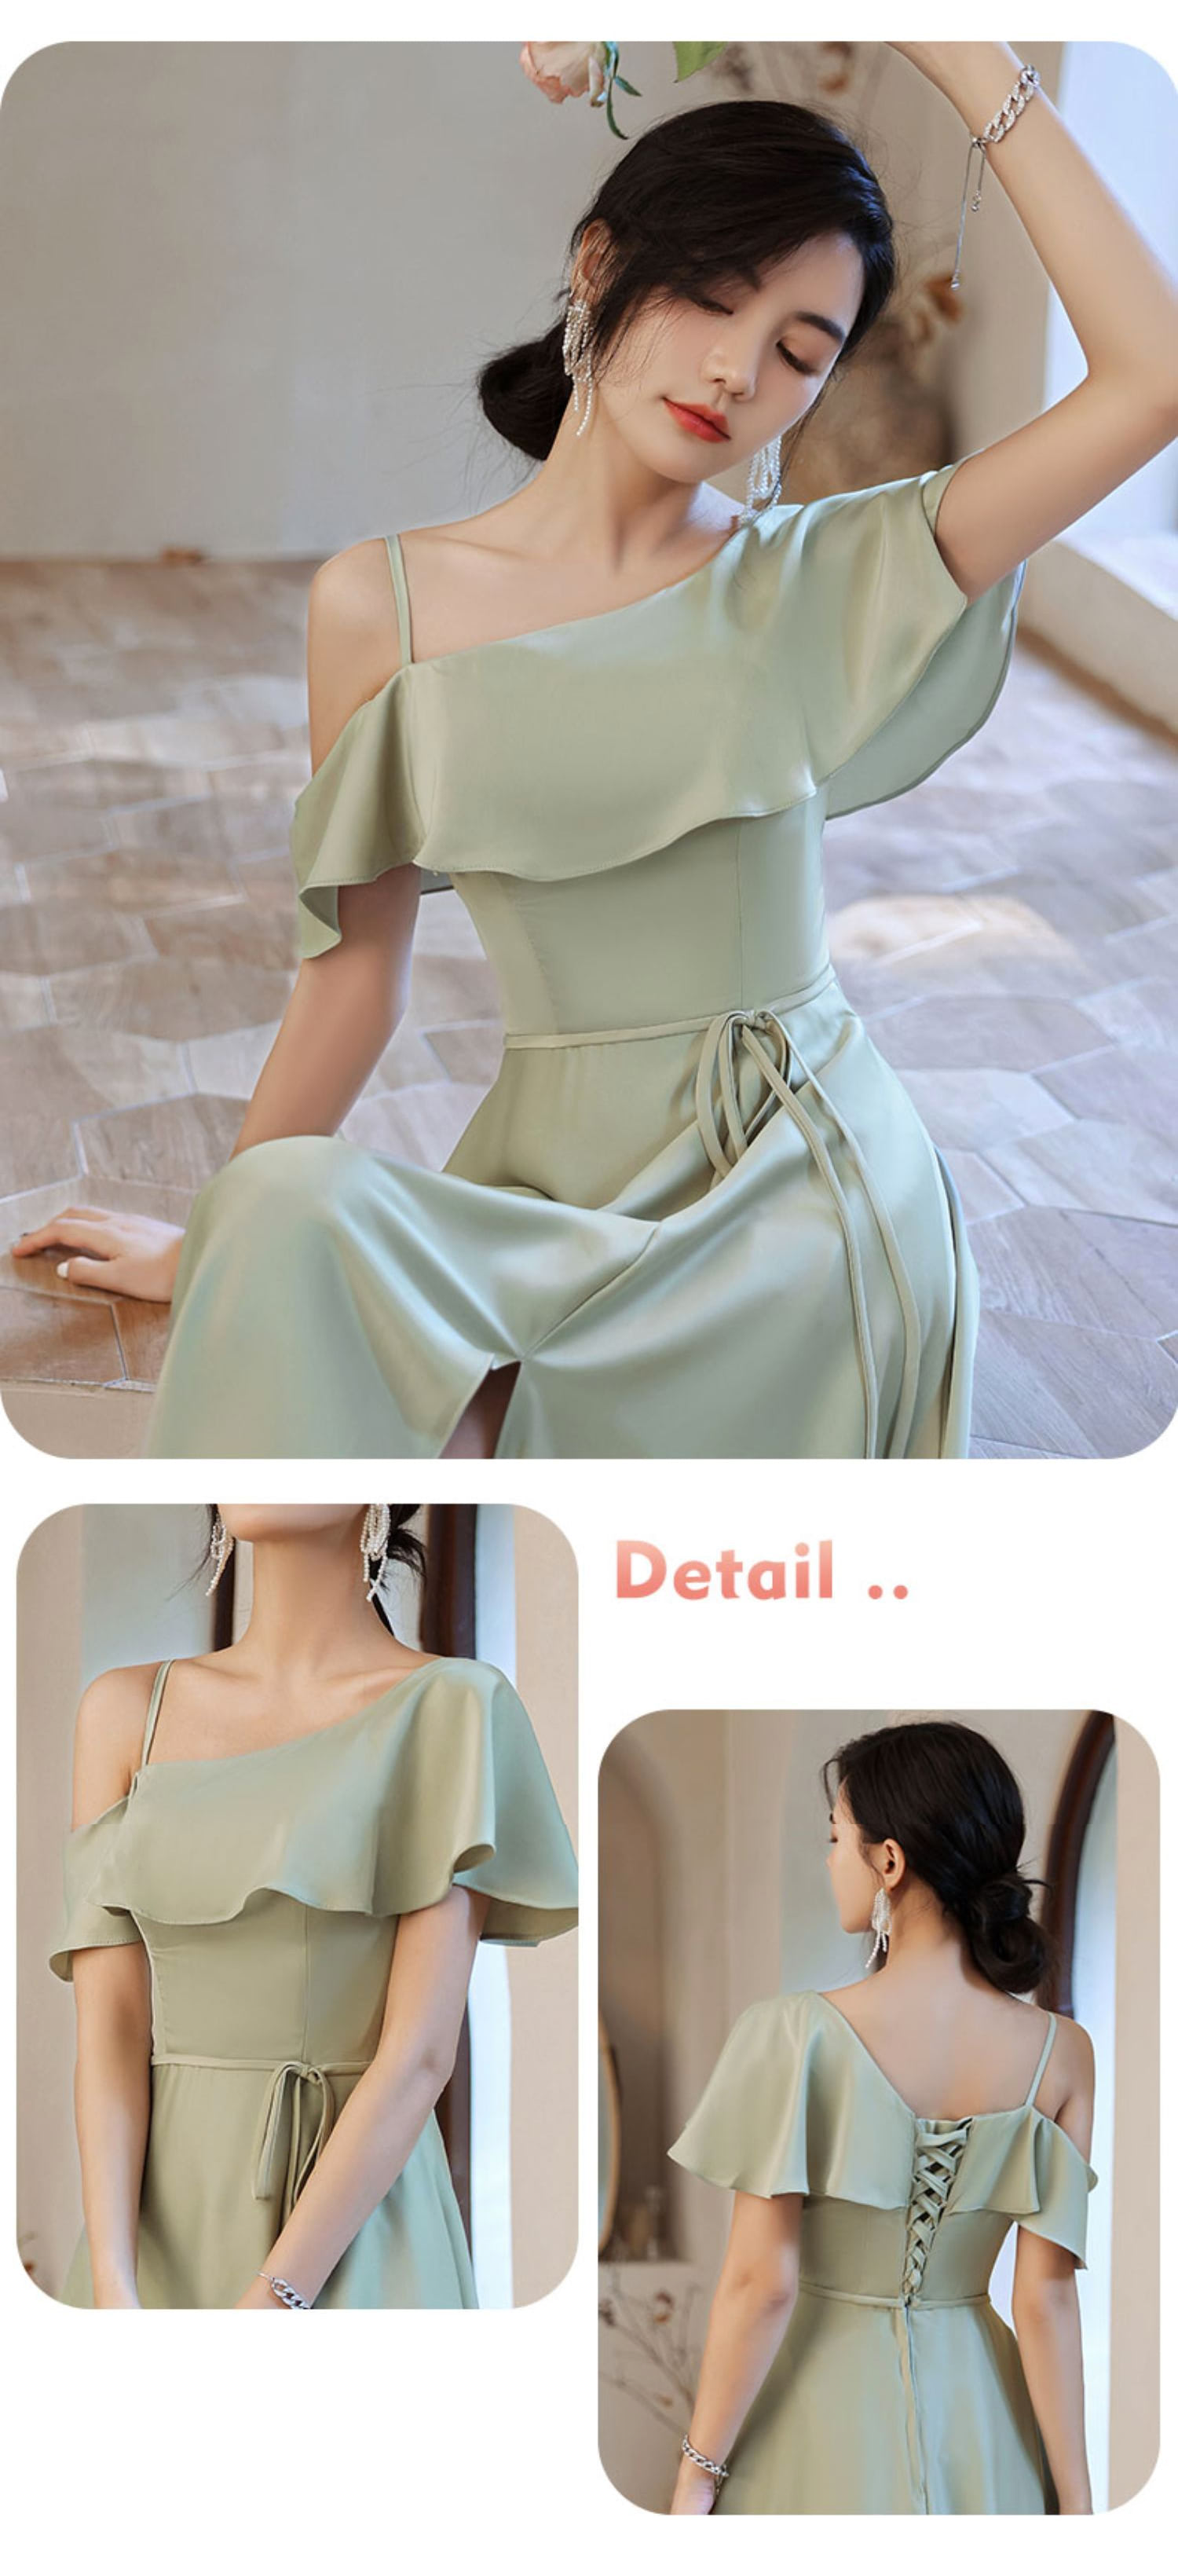 Simple-Olive-Green-Satin-Bridesmaid-Dress-Beach-Wedding-Guest-Outfit16